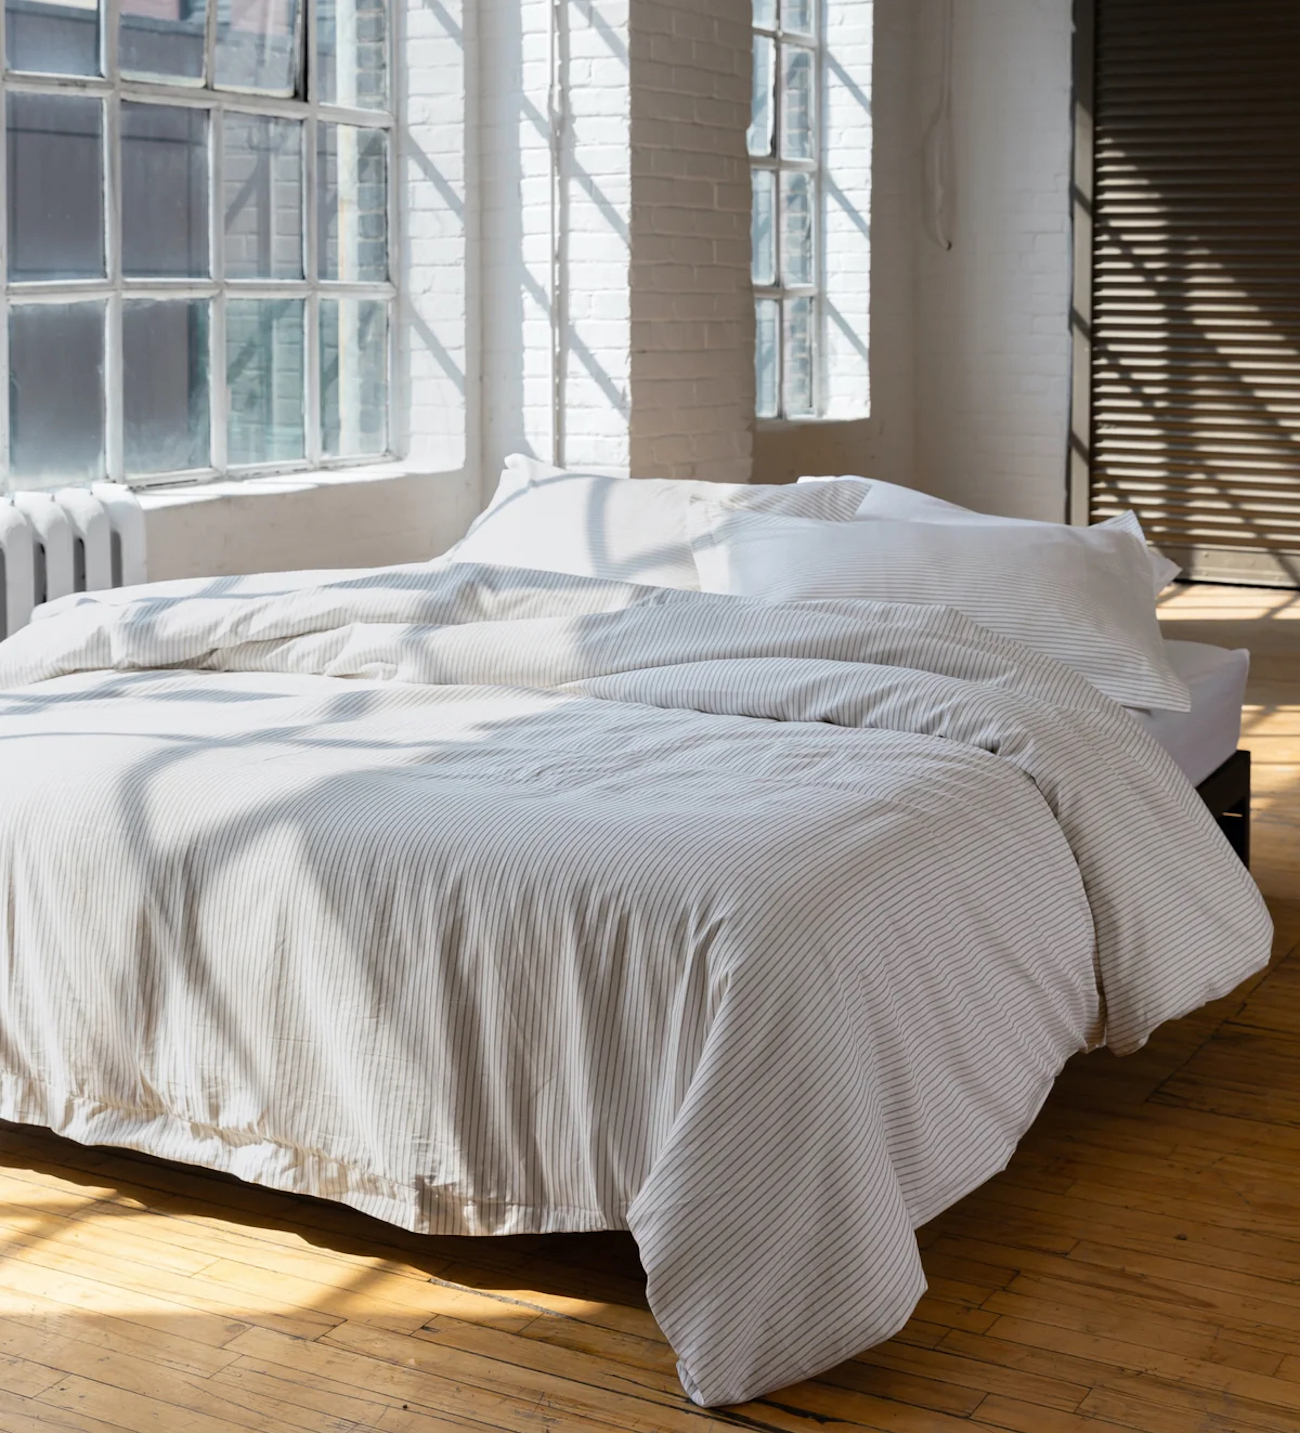 Bedroom Products, Bedding, Best Beds